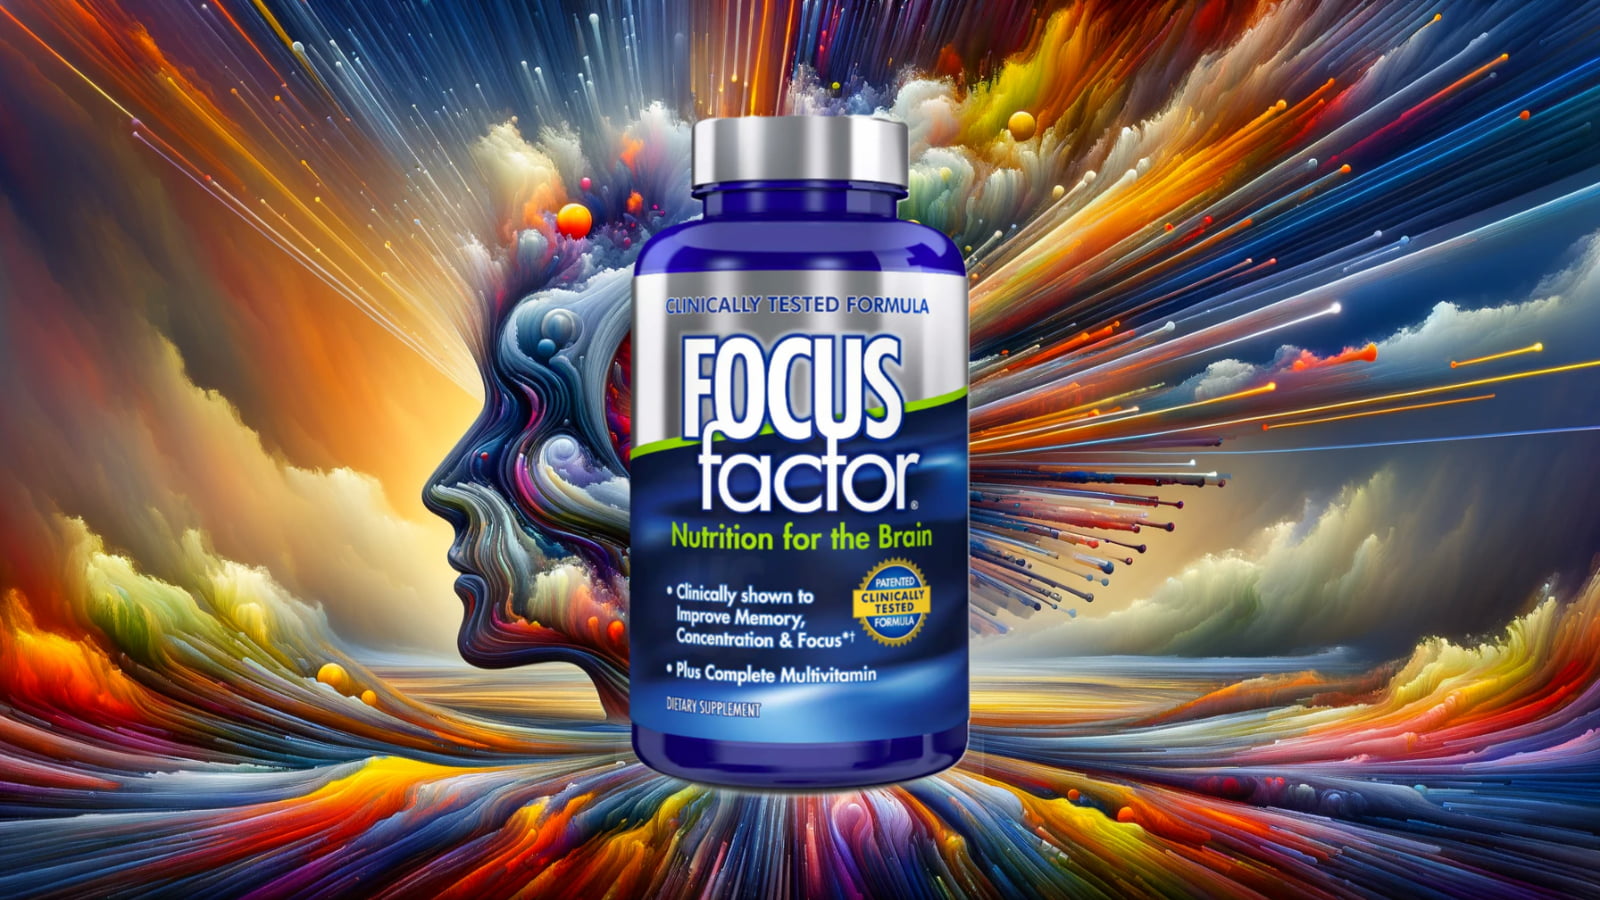 Exploring the cognitive benefits and potential of Focus Factor in enhancing brain health